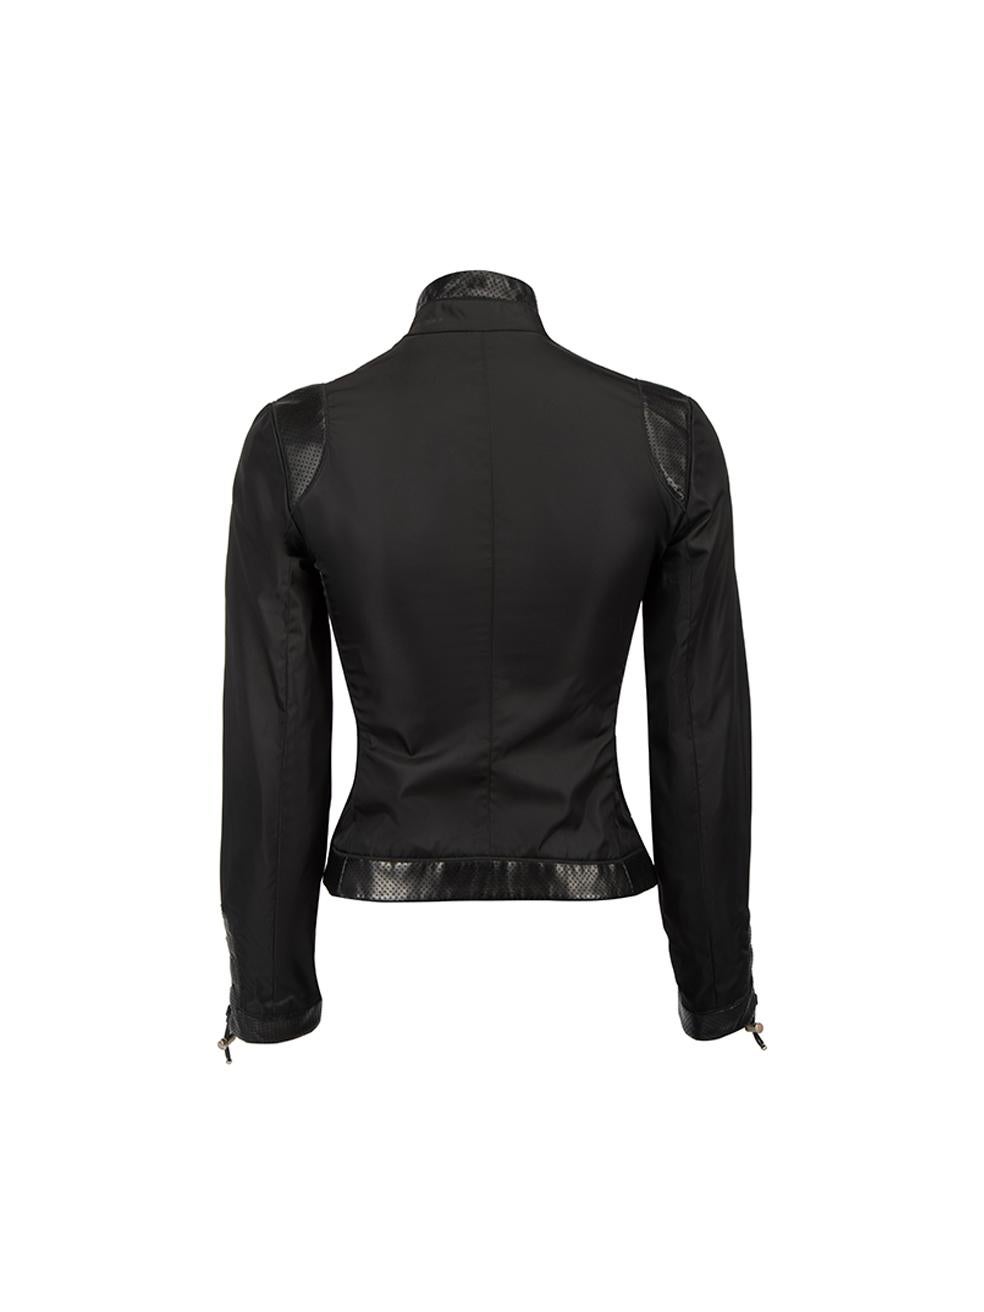 Prada Women's Black Perforated Leather Accent Track Jacket In Good Condition For Sale In London, GB